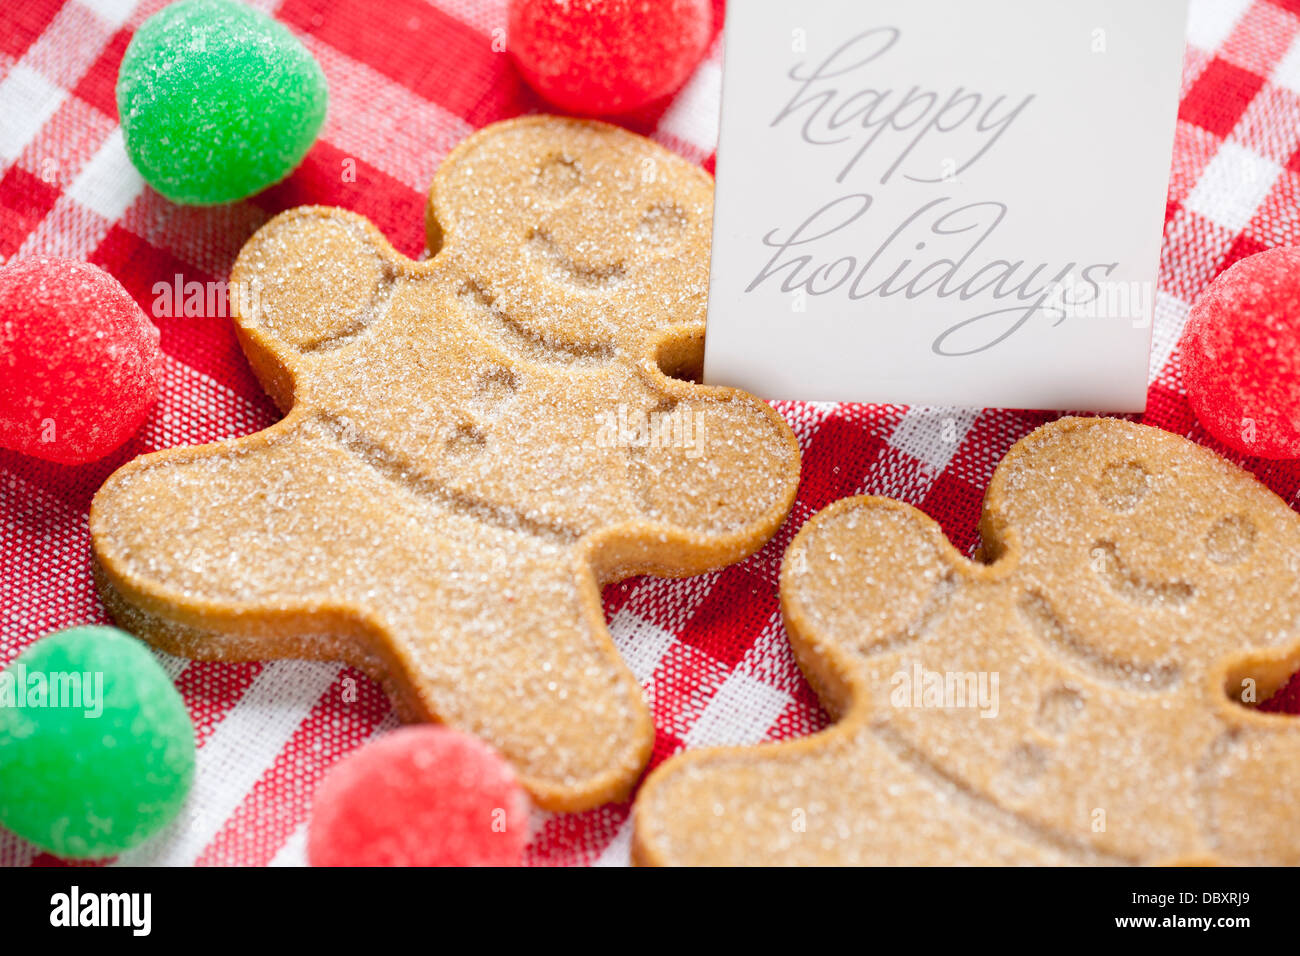 cropped image of gingerbread candies with happy holidays tag Stock Photo